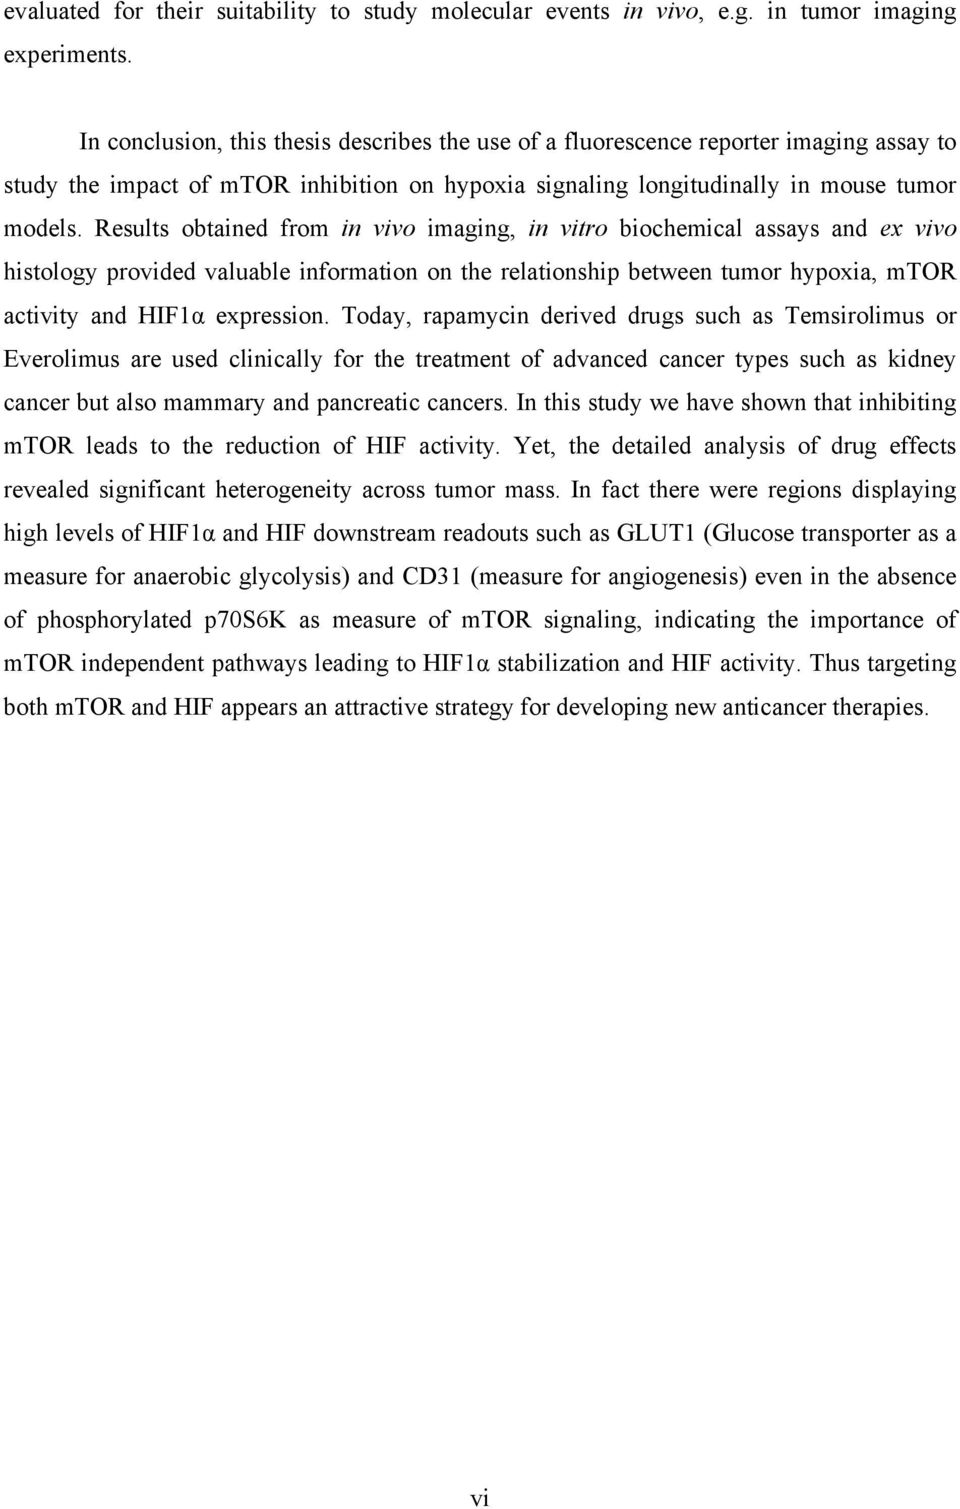 Results obtained from in vivo imaging, in vitro biochemical assays and ex vivo histology provided valuable information on the relationship between tumor hypoxia, mtor activity and HIF1α expression.